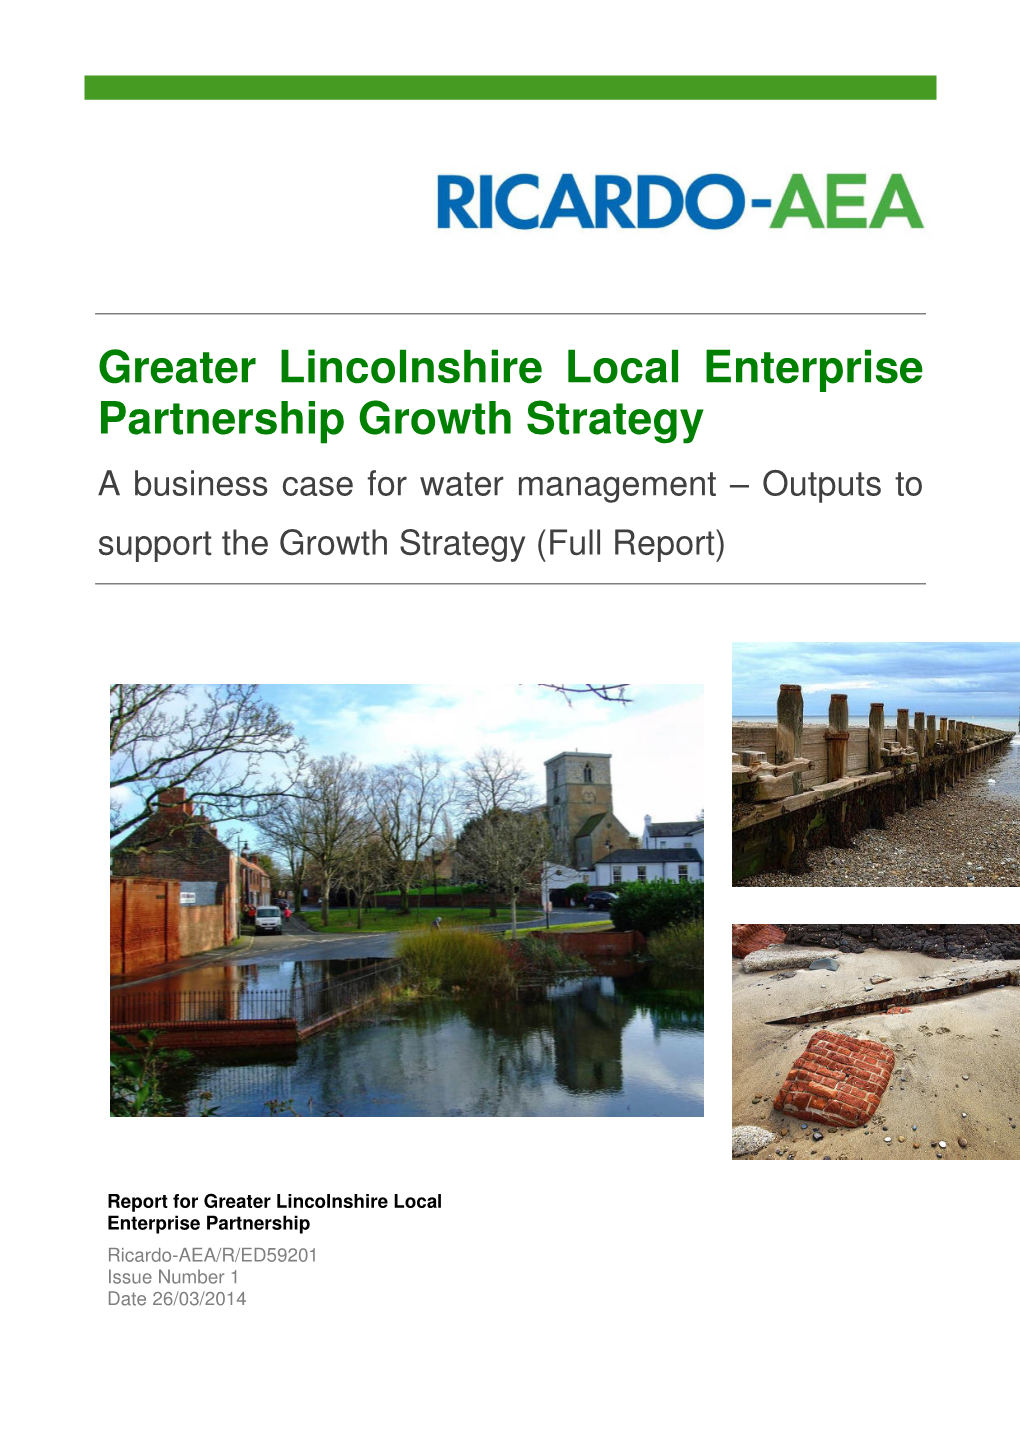 Greater Lincolnshire Local Enterprise Partnership Growth Strategy a Business Case for Water Management – Outputs to Support the Growth Strategy (Full Report)